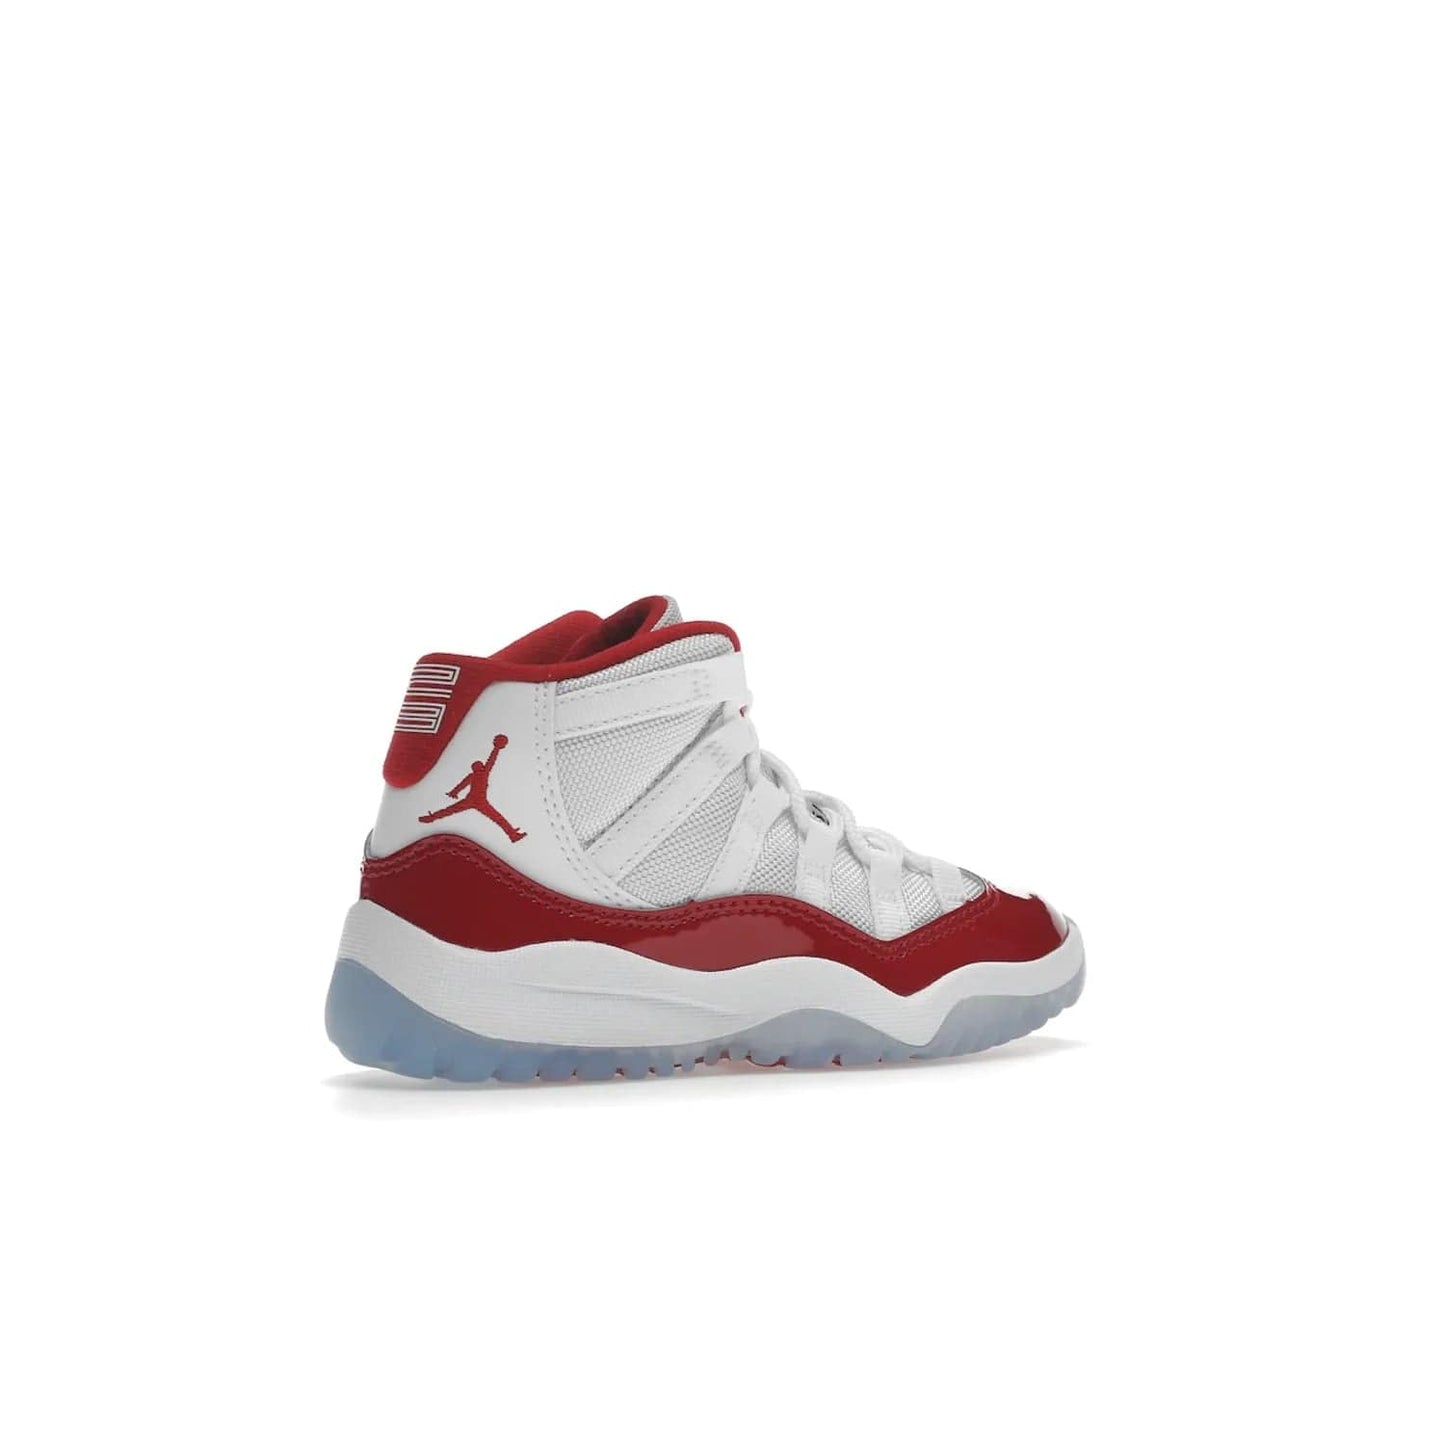 Jordan 11 Retro Cherry (2022) (PS) - Image 34 - Only at www.BallersClubKickz.com - An iconic silhouette with a timeless look, the Air Jordan 11 Retro Cherry 2022 PS features a crisp White, Varsity Red and Black colorway. The upper is made of ballistic mesh, a red patent leather mudguard, '23' branding and white Phylon midsole. Get optimal cushioning and comfort on December 10th, 2022. Don't miss out.